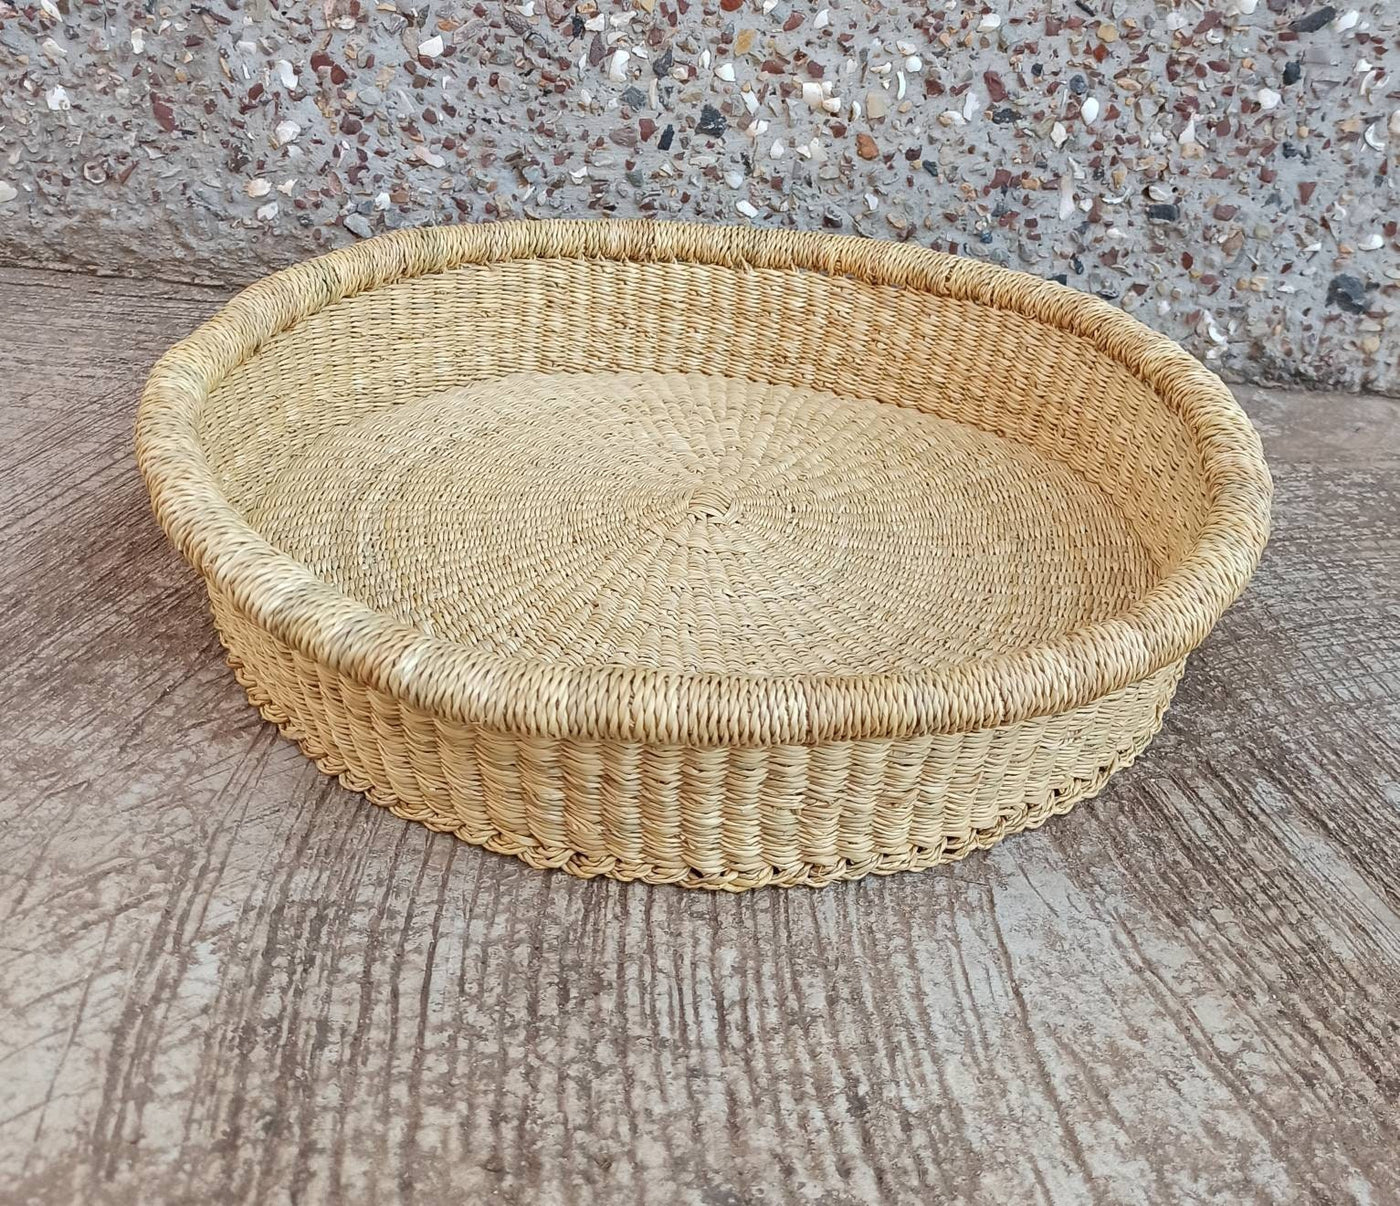 Fruit basket| Wall Basket | Fruit bowl | Tray basket | Tray decor | Tray for table | African handmade serving tray  | Kitchen tray - AfricanheritageGH